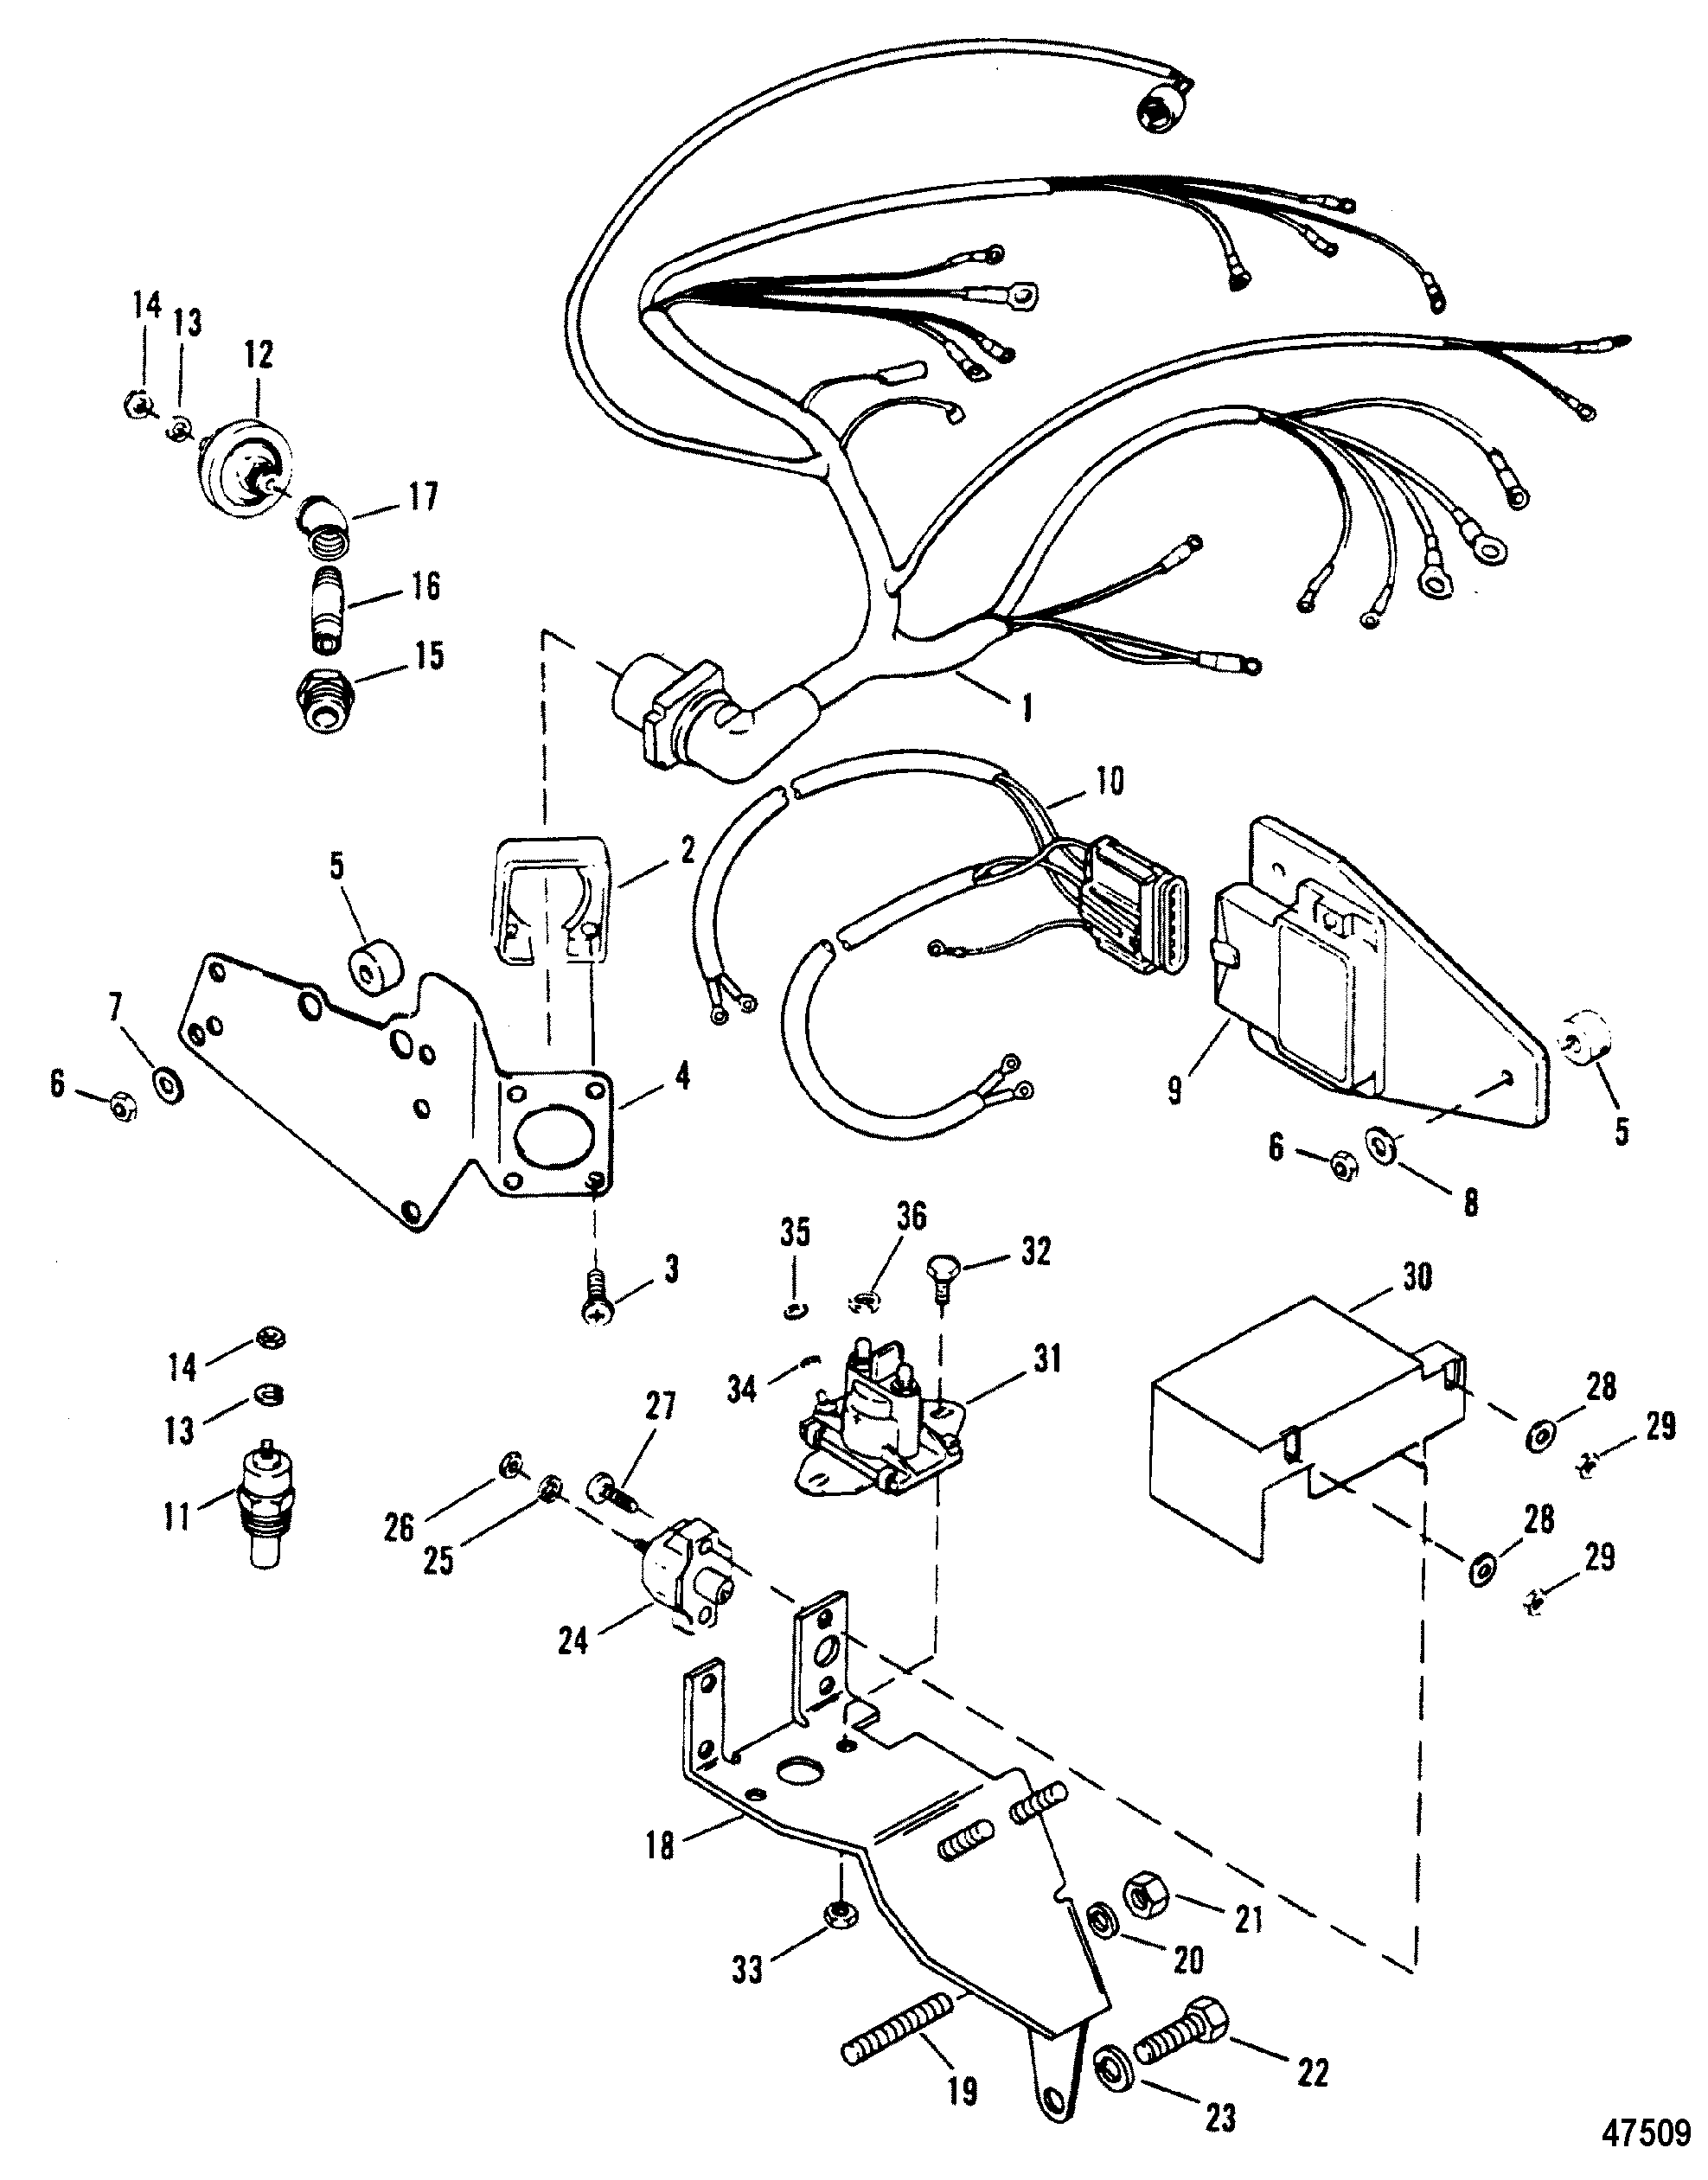 WIRING HARNESS AND ELECTRICAL COMPONENTS(EXHAUST BELOW)